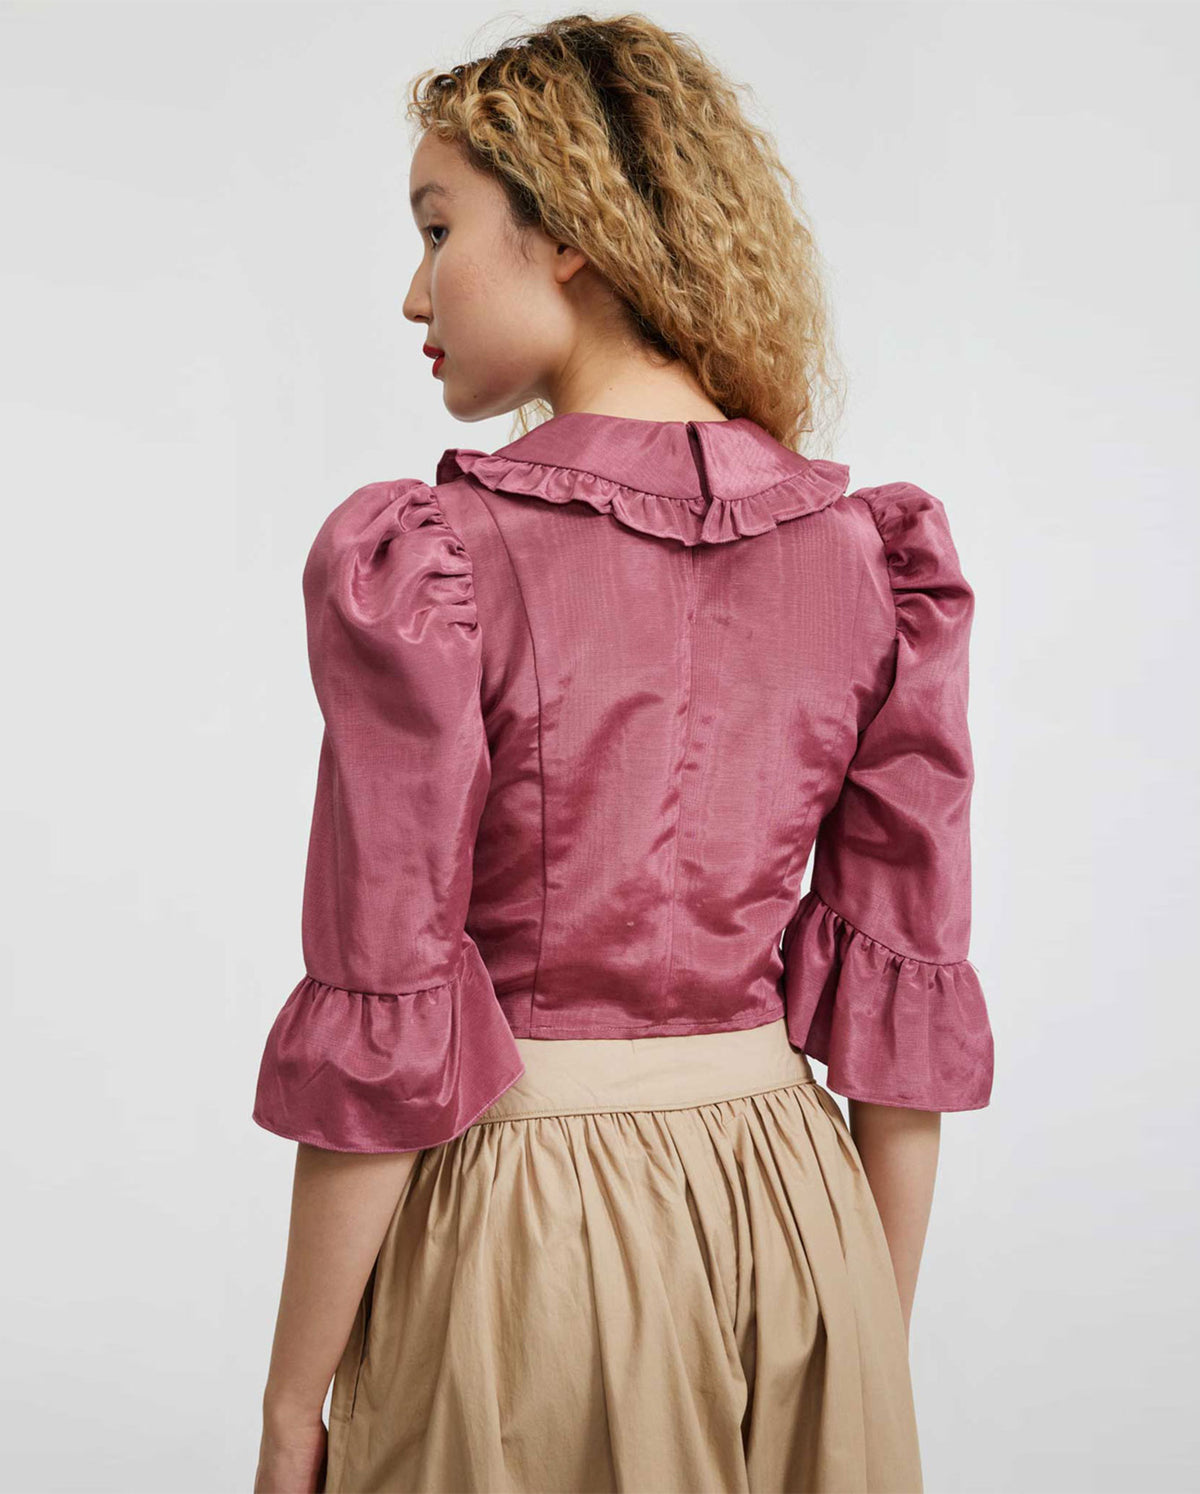 Spring Lucy Top - Thulian Rose Moire